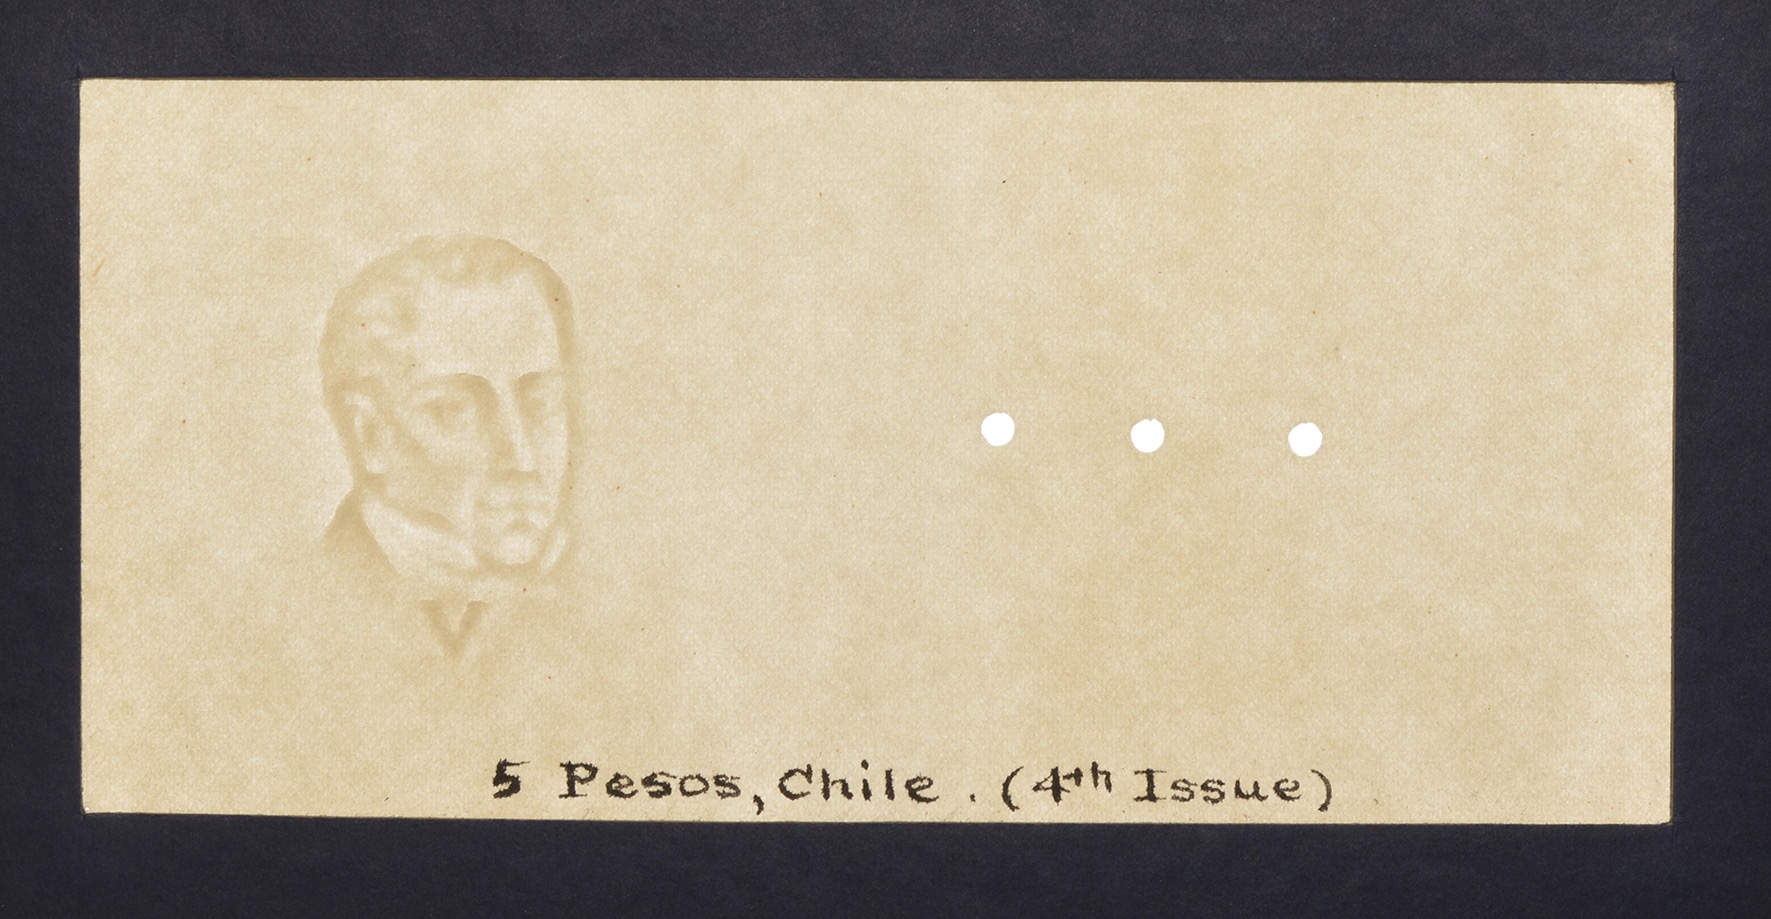 Banco Central de Chile, a complete set of watermarked paper for the 5, 10, 20, 50, 100,... - Image 4 of 9